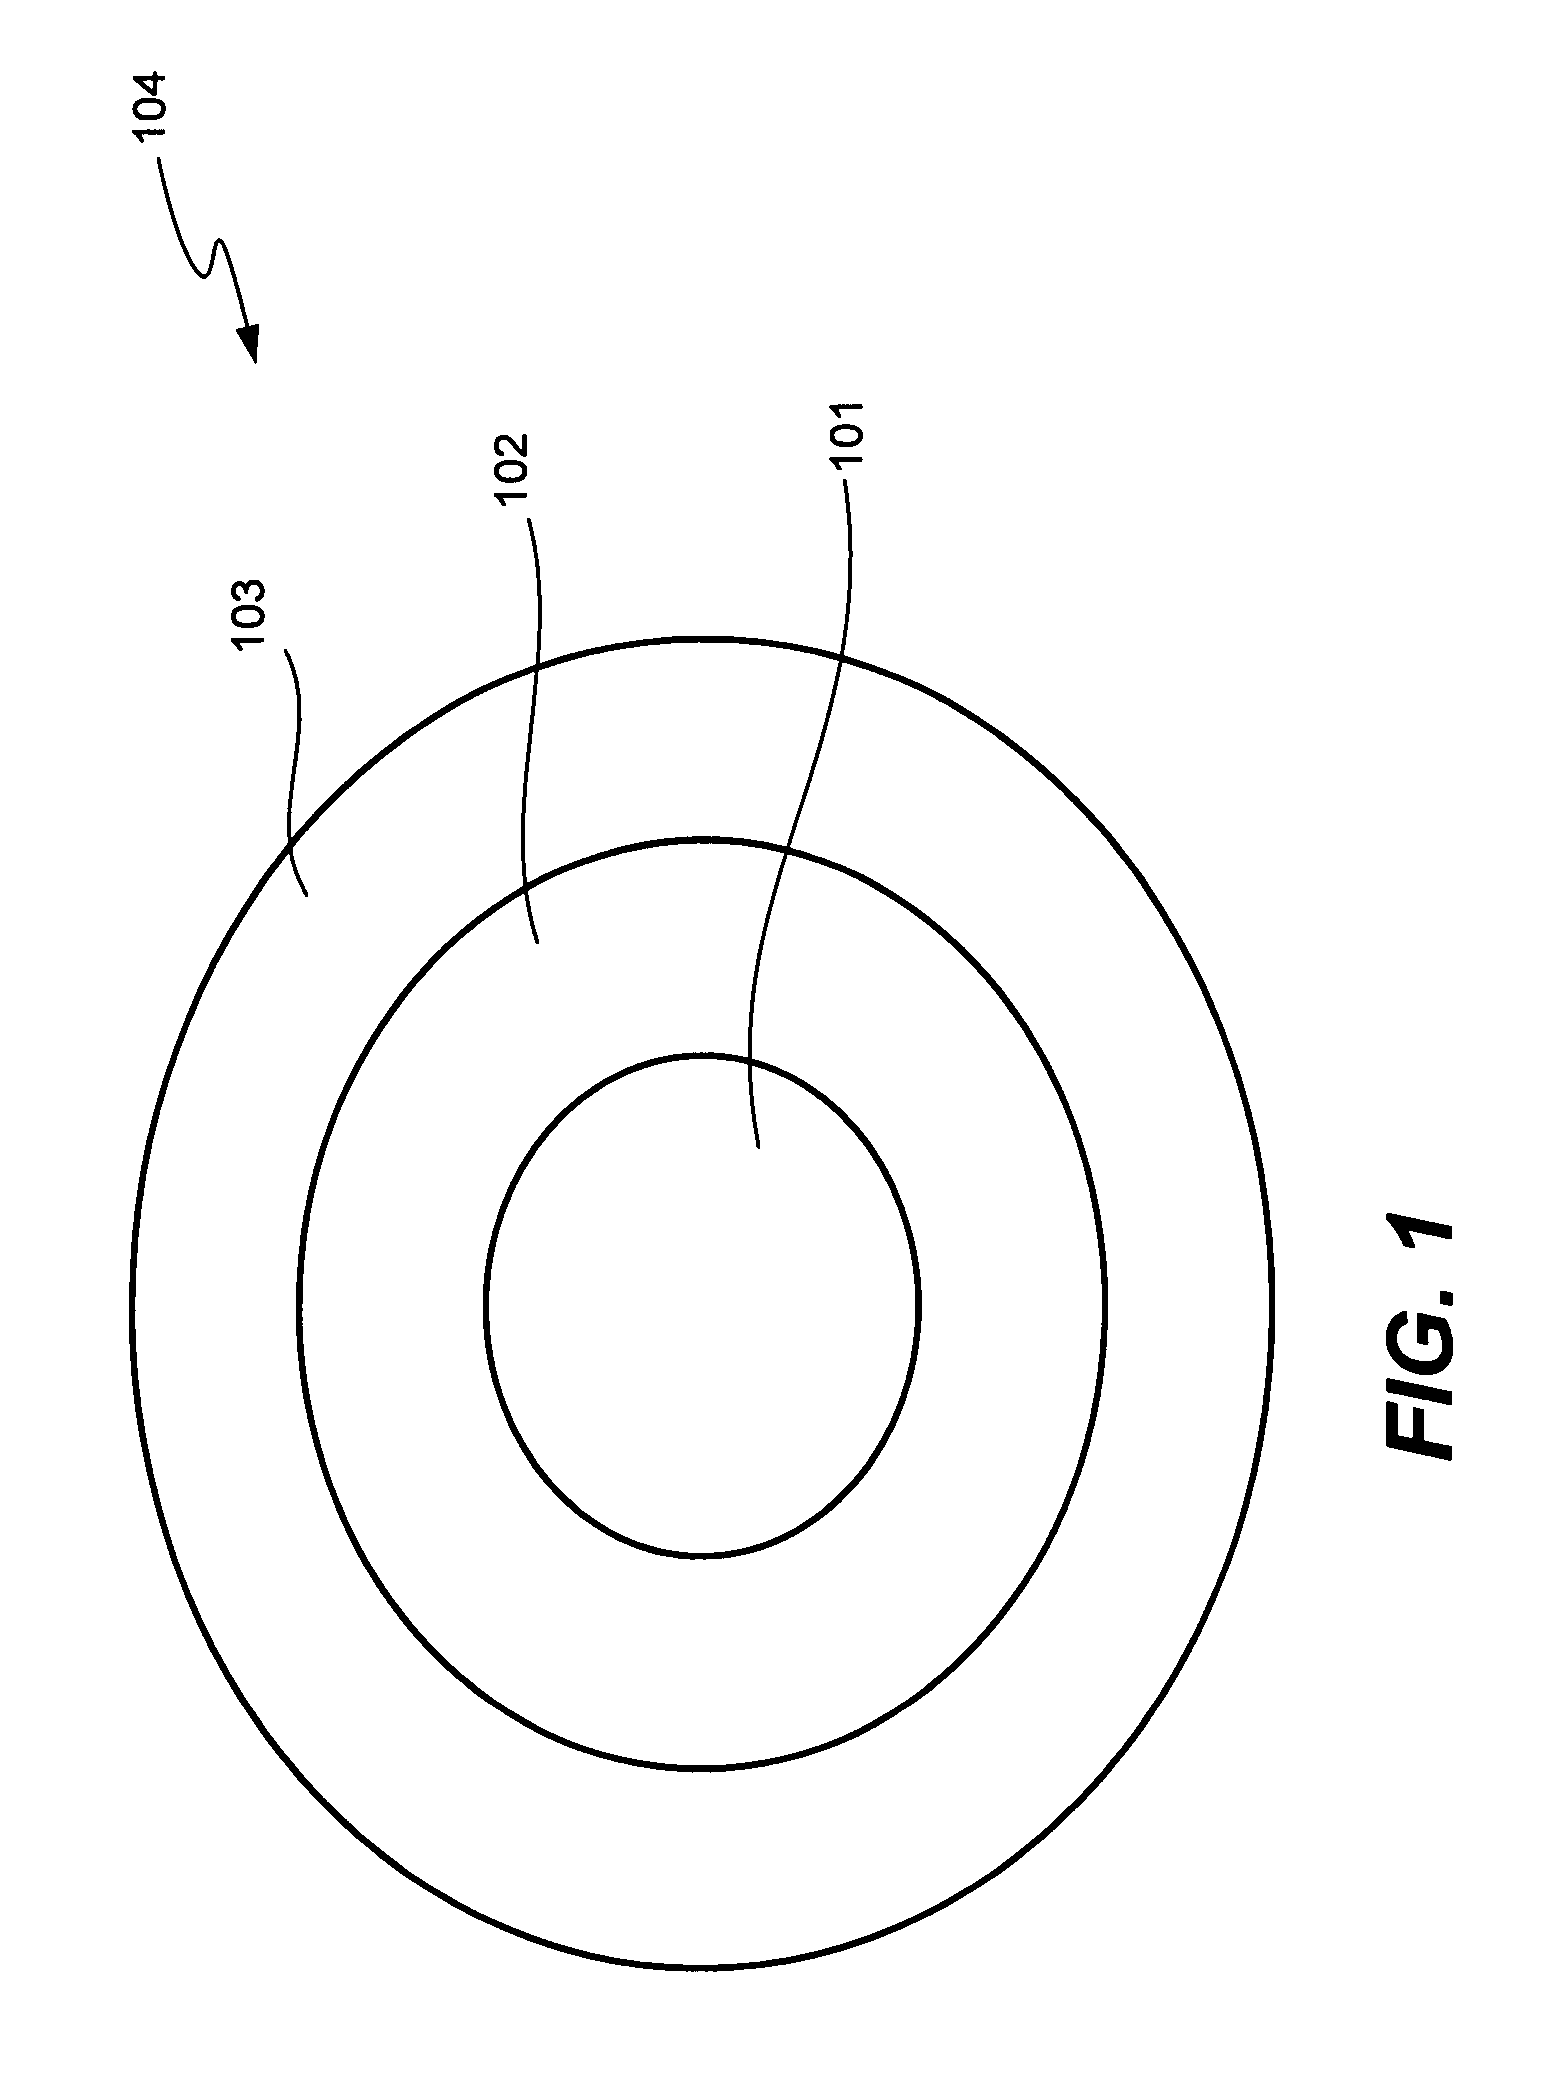 Method and apparatus for role-based access control